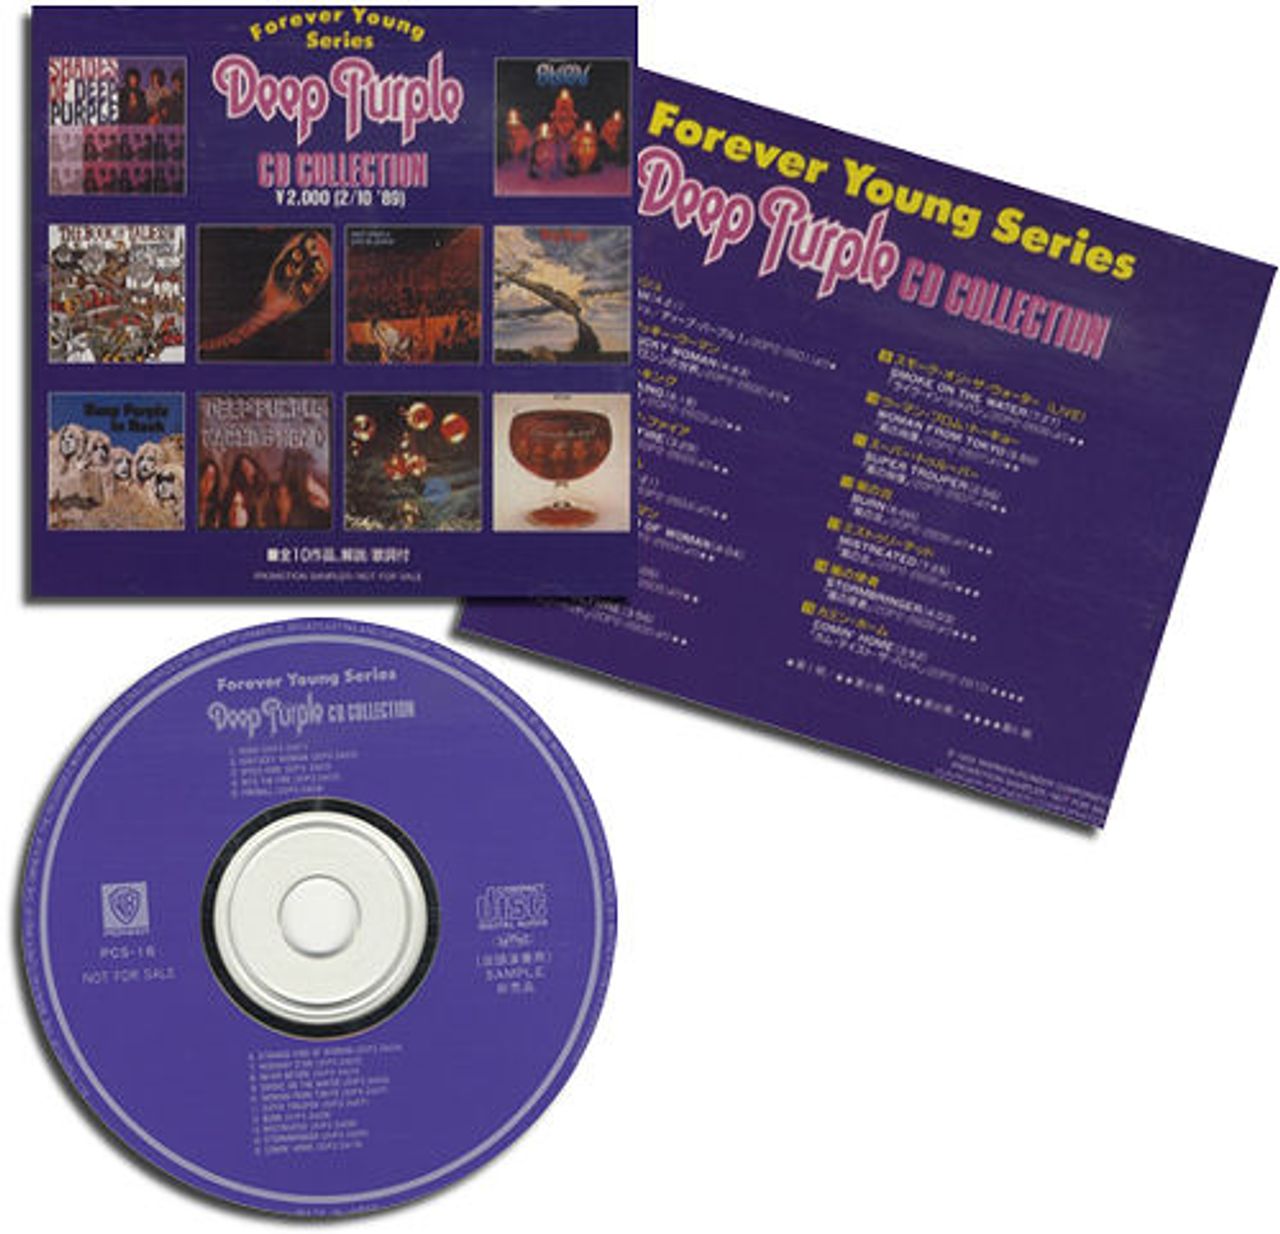 Deep Purple Forever Young Series: Deep Purple CD Collection